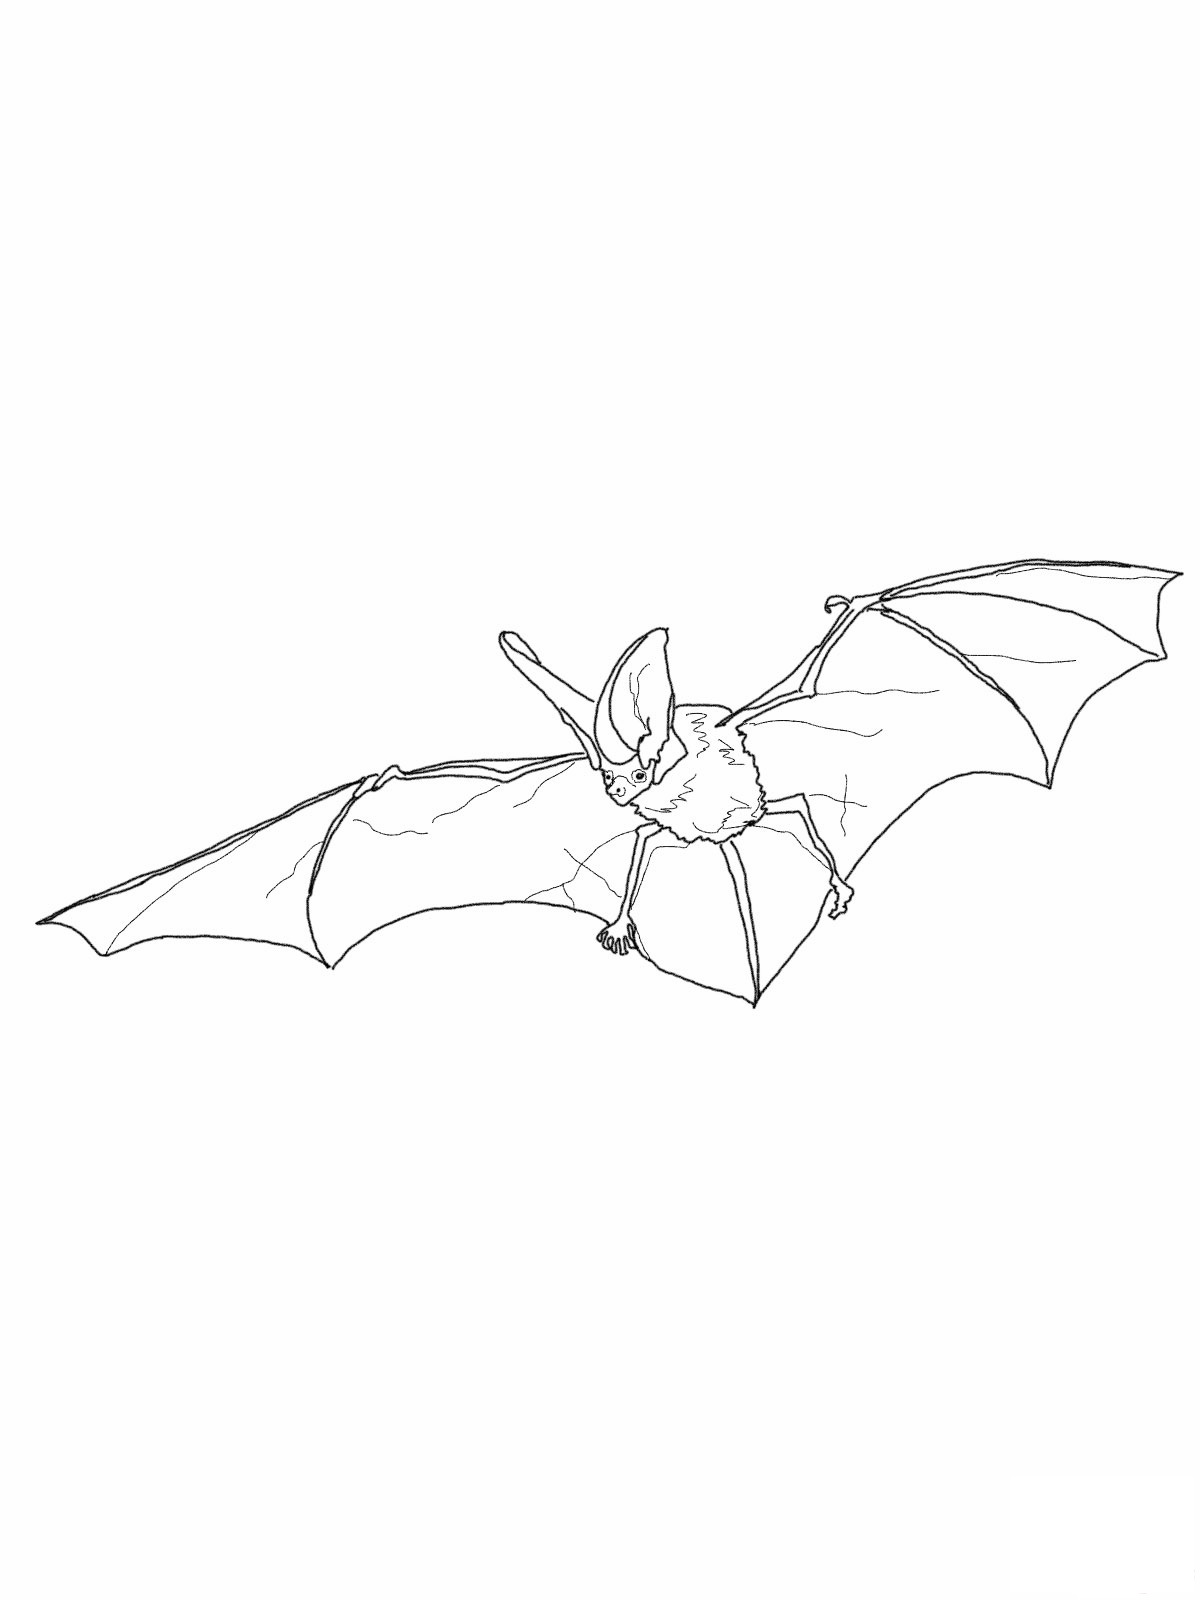 Nice Bat For Kids Coloring Page